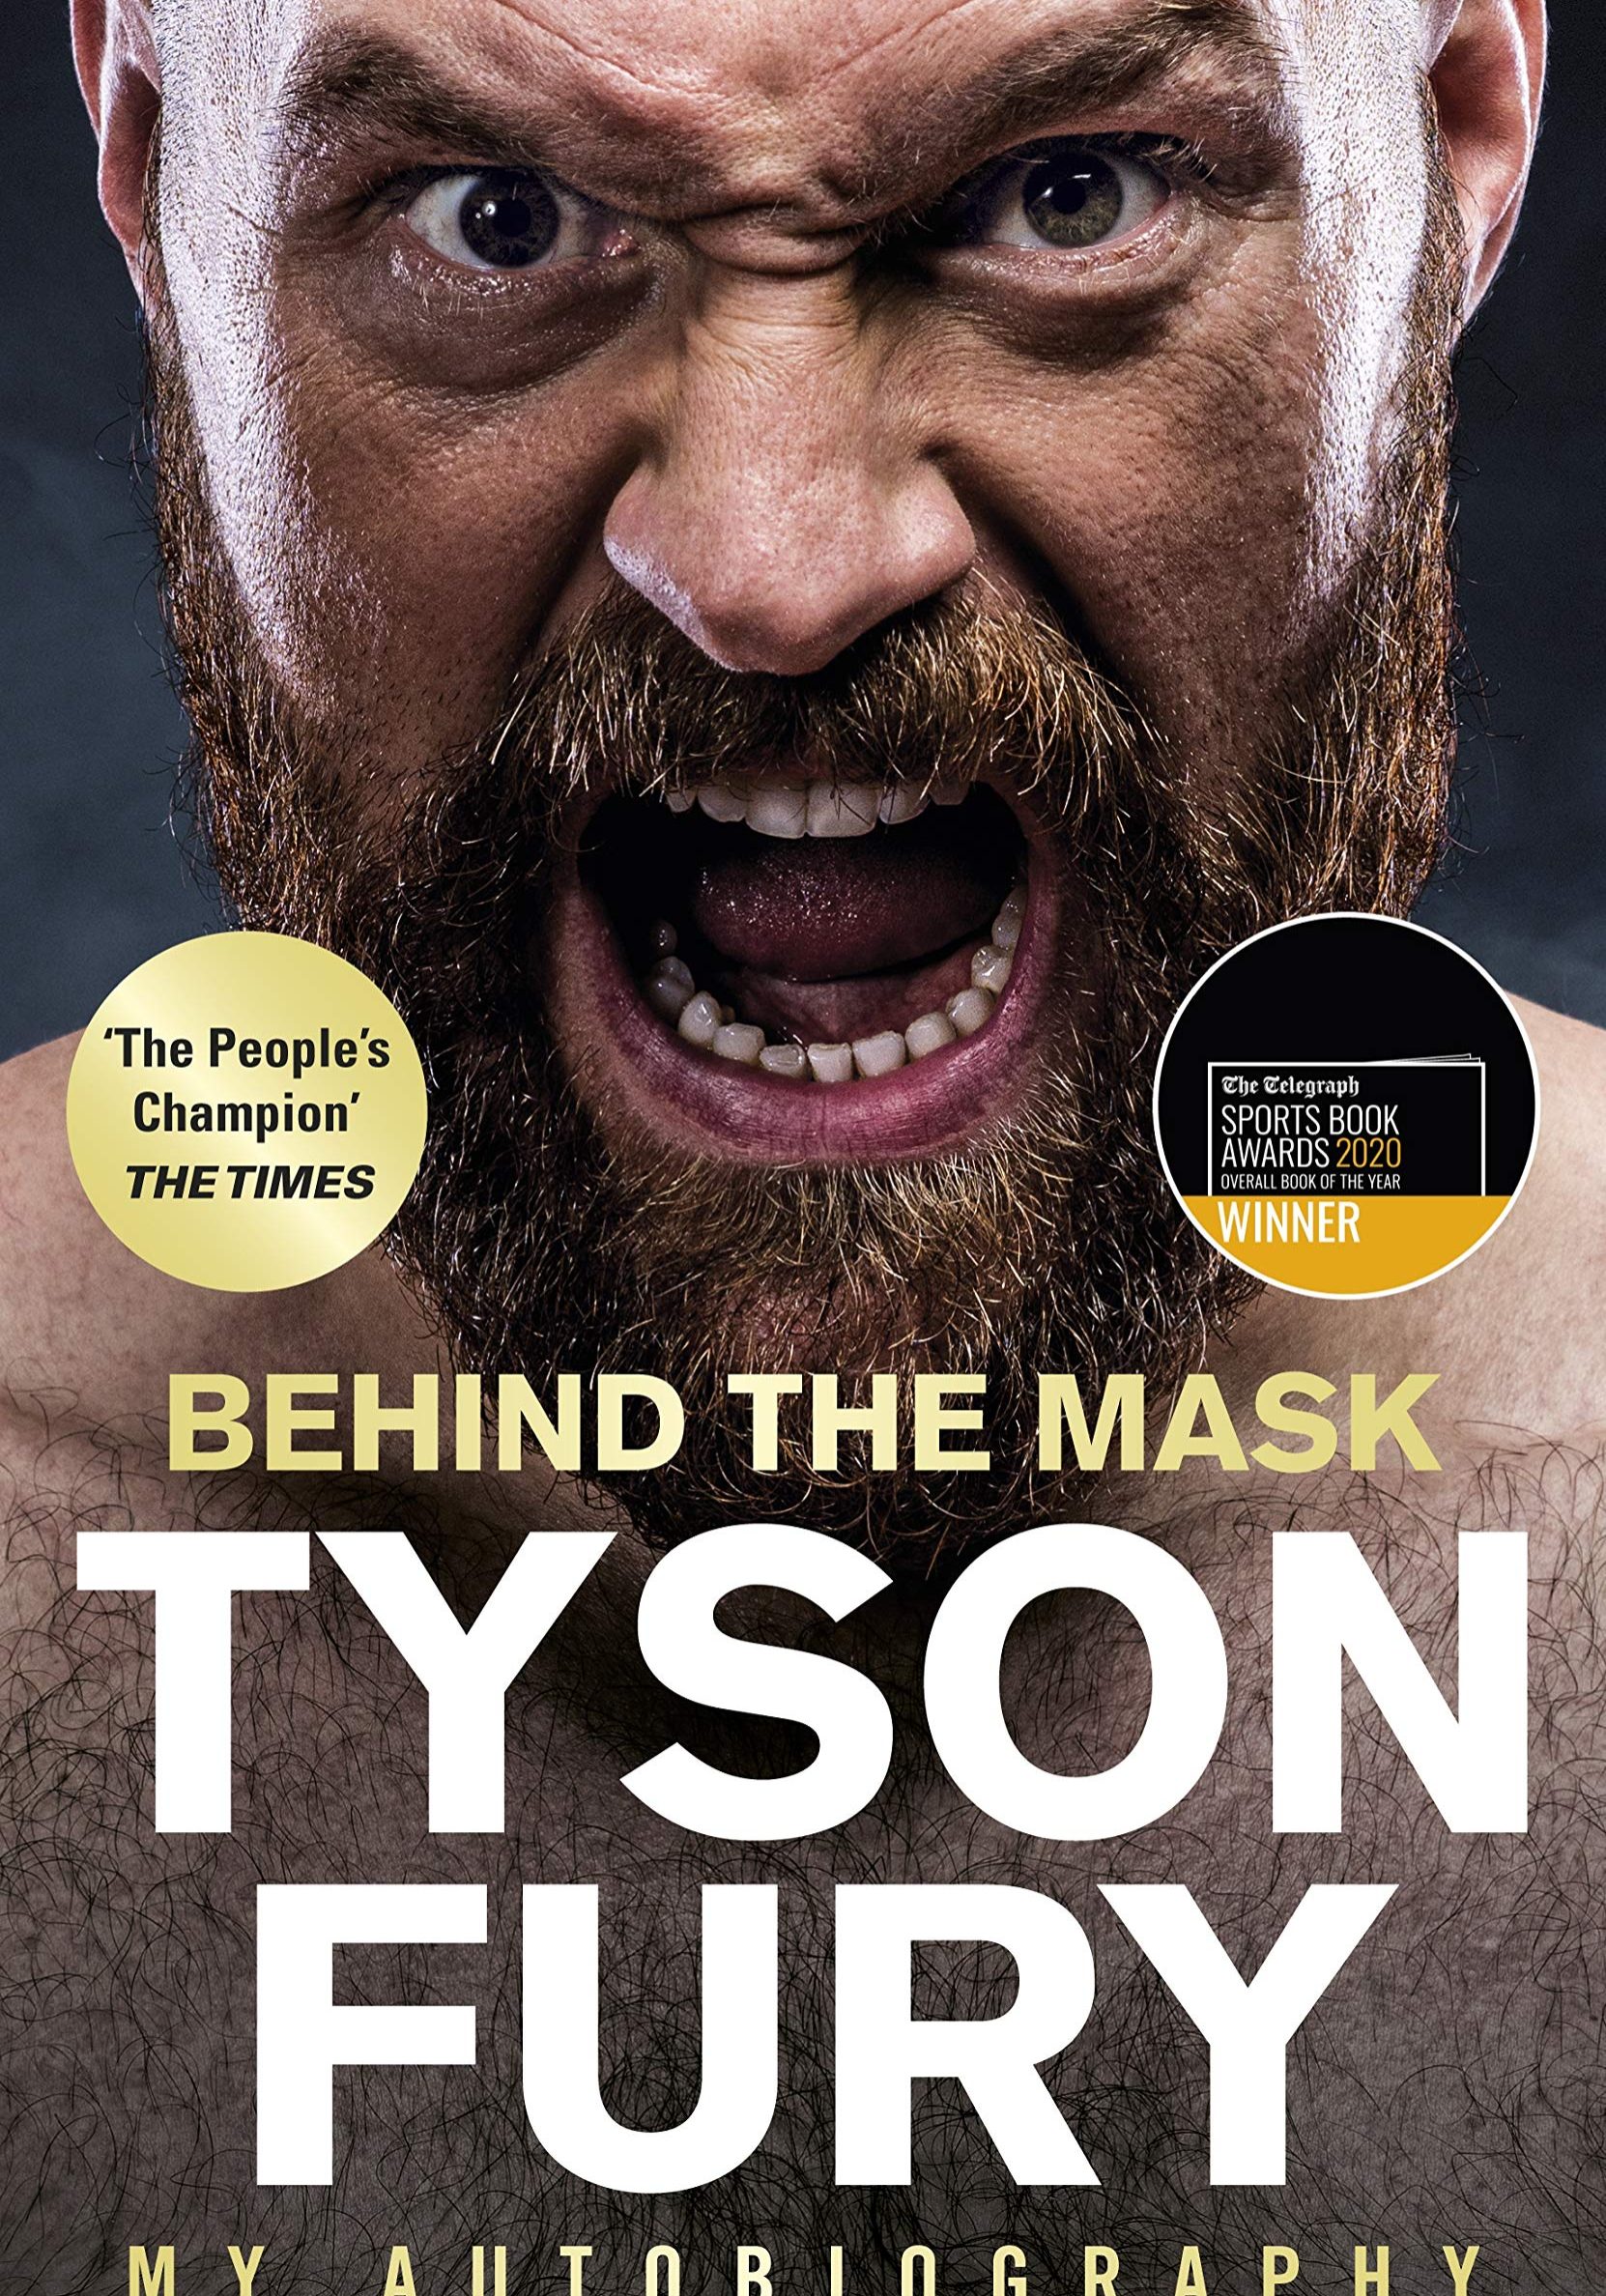 Behind the mask tyson fury